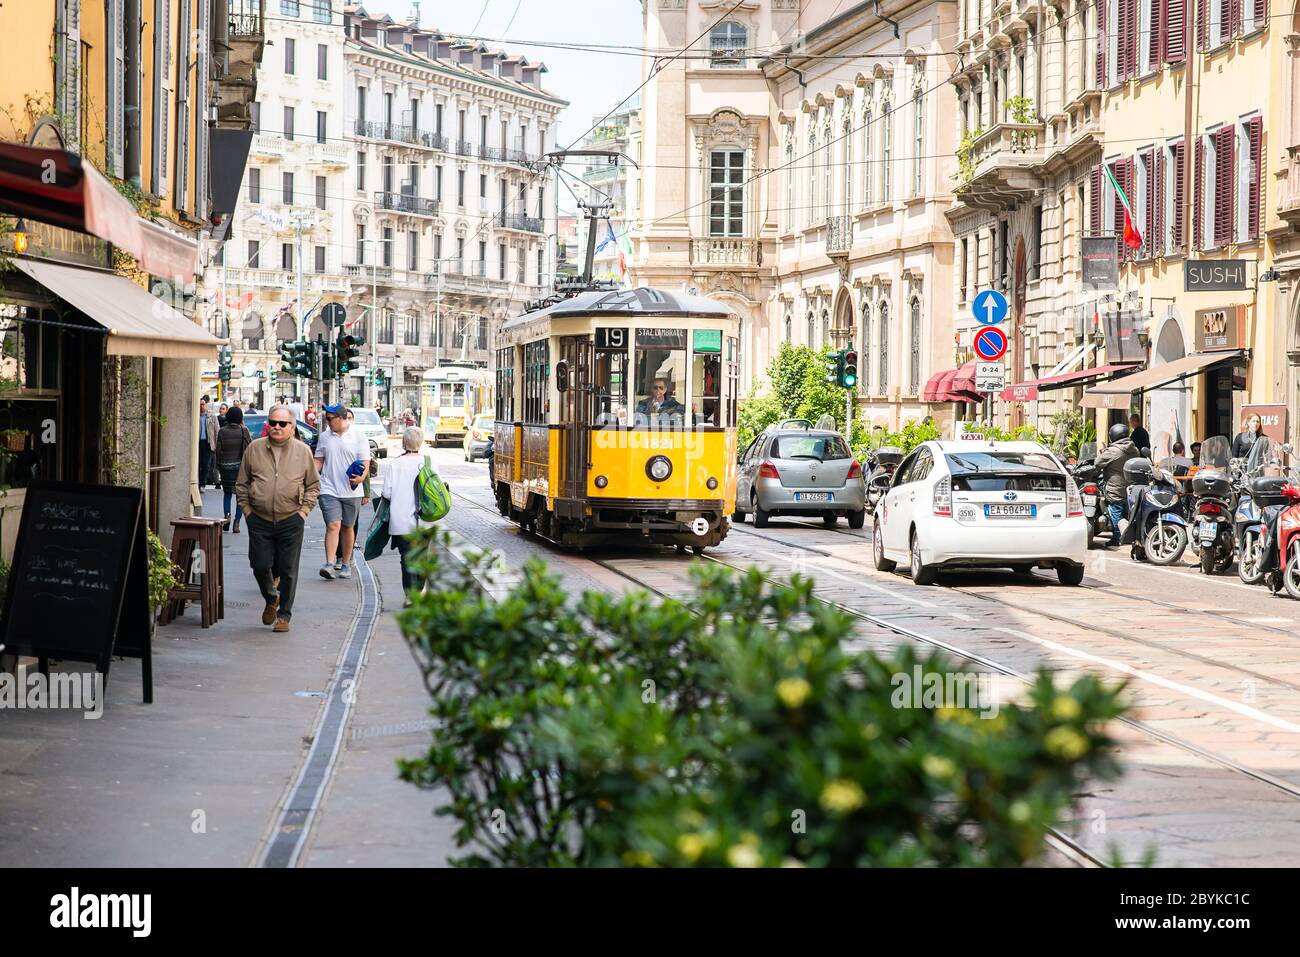 Milan. Italy - May 21, 2019: Old Yellow MIlan Tram. Street Panorama with Pedestrians and Cars on a Sunny Day. Stock Photo